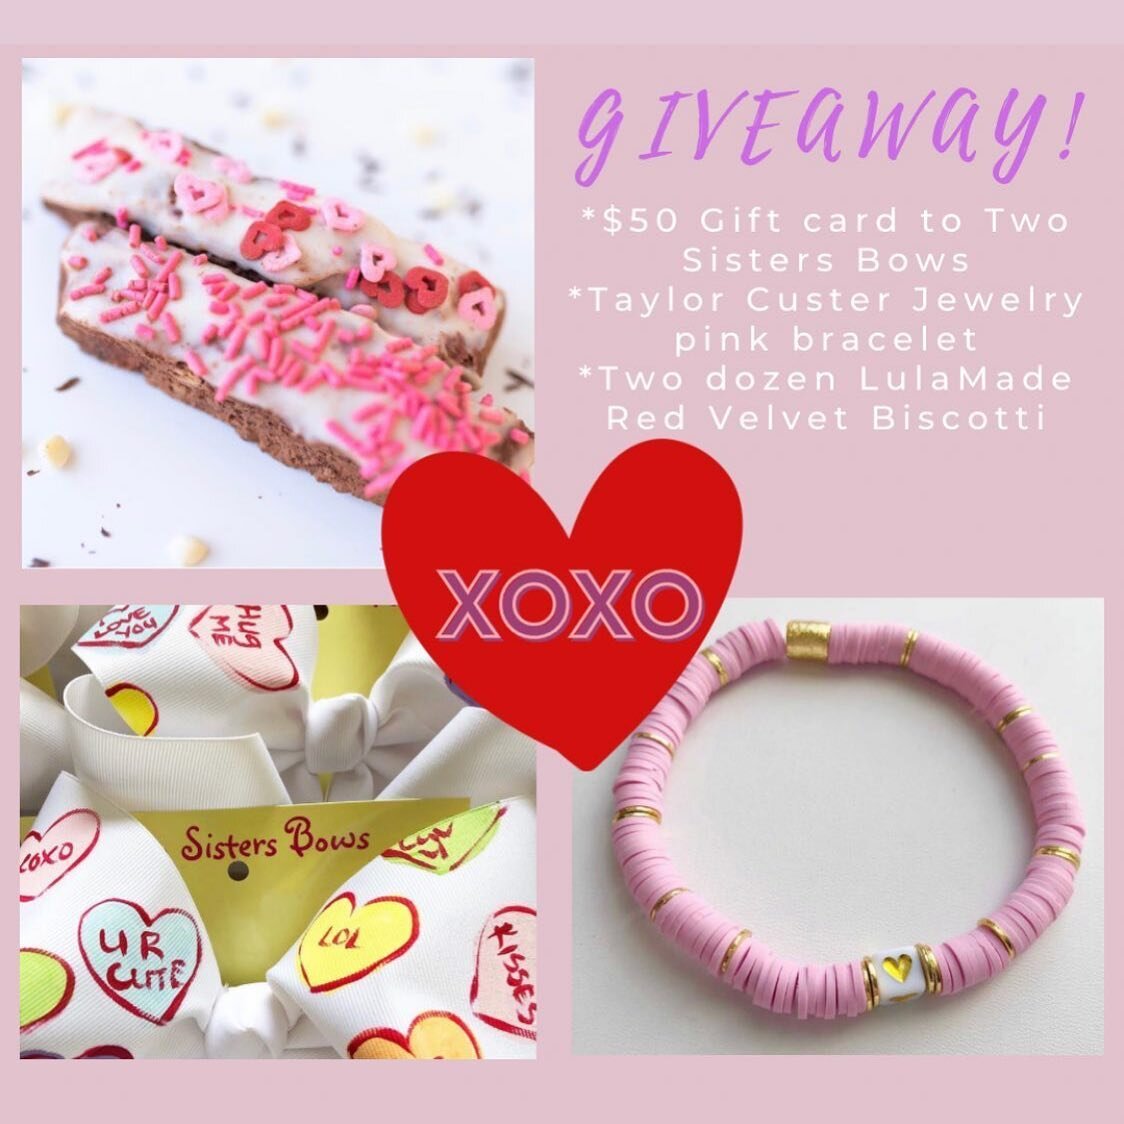 🚨💗GIVEAWAY 💗🚨 Biscotti 🥖 Bracelets 📿 and Bows 🎀 oh my! 
&bull;
&bull;
It&rsquo;s almost Valentine&rsquo;s Day! What better way to treat your sweetie, than to WIN this line up! 
&bull;
&bull;
$50 to @twosistersbows 2 dozen red velvet biscotti @